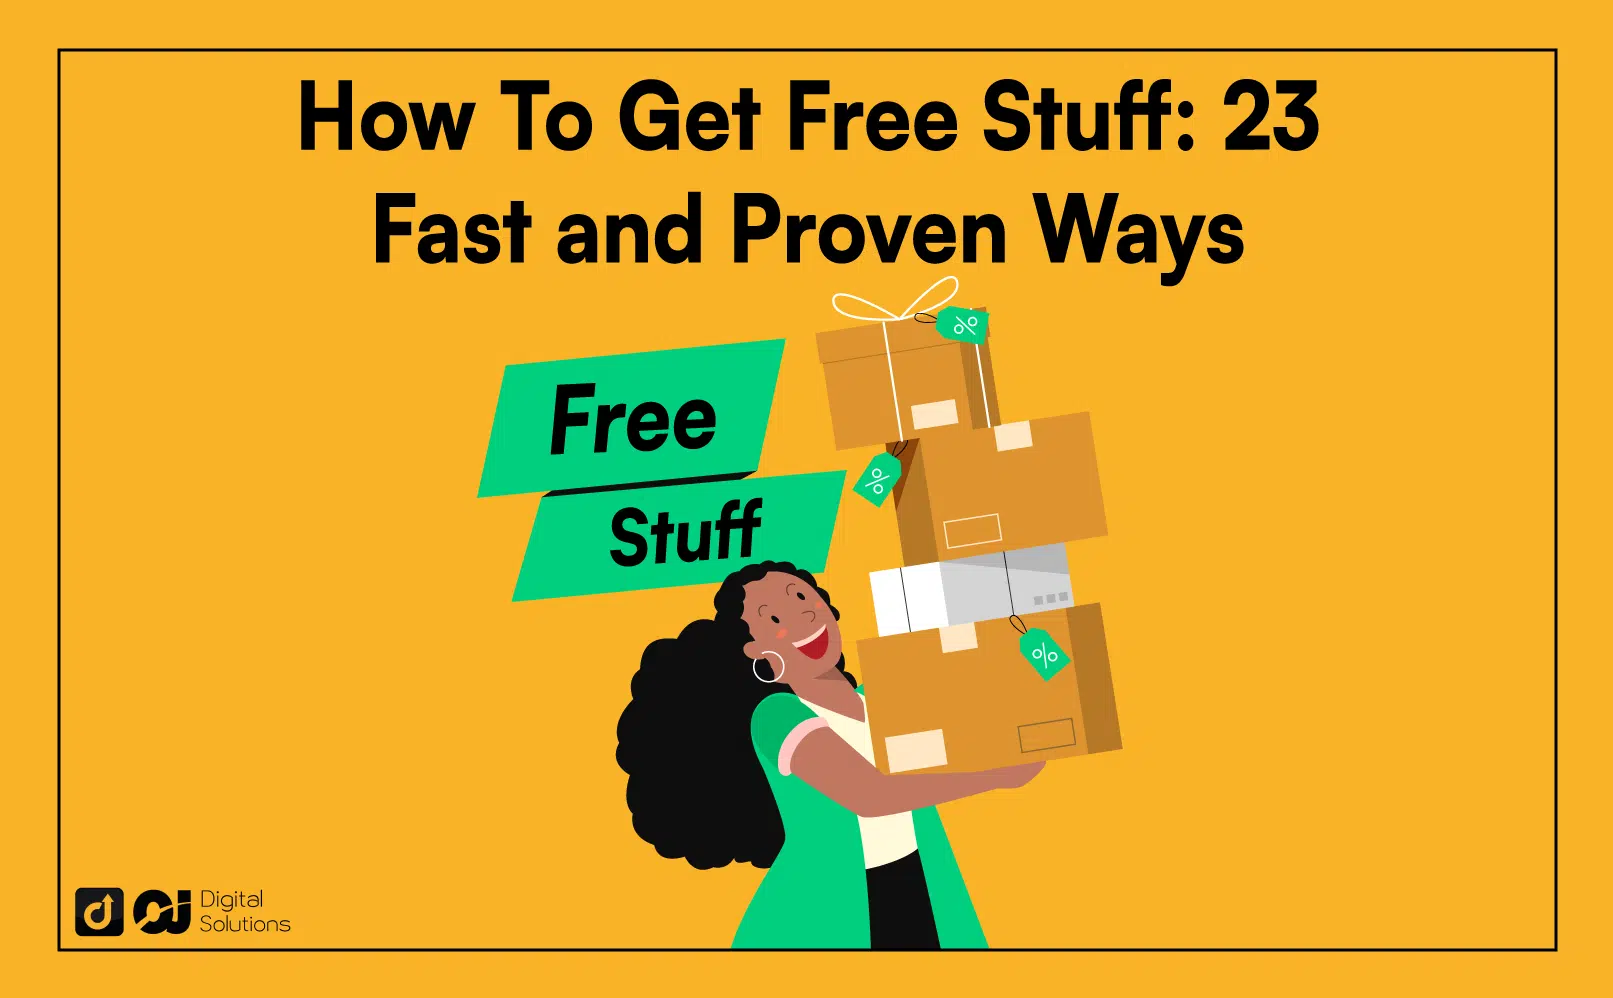 6 Proven Ways To Get Free Stuff On